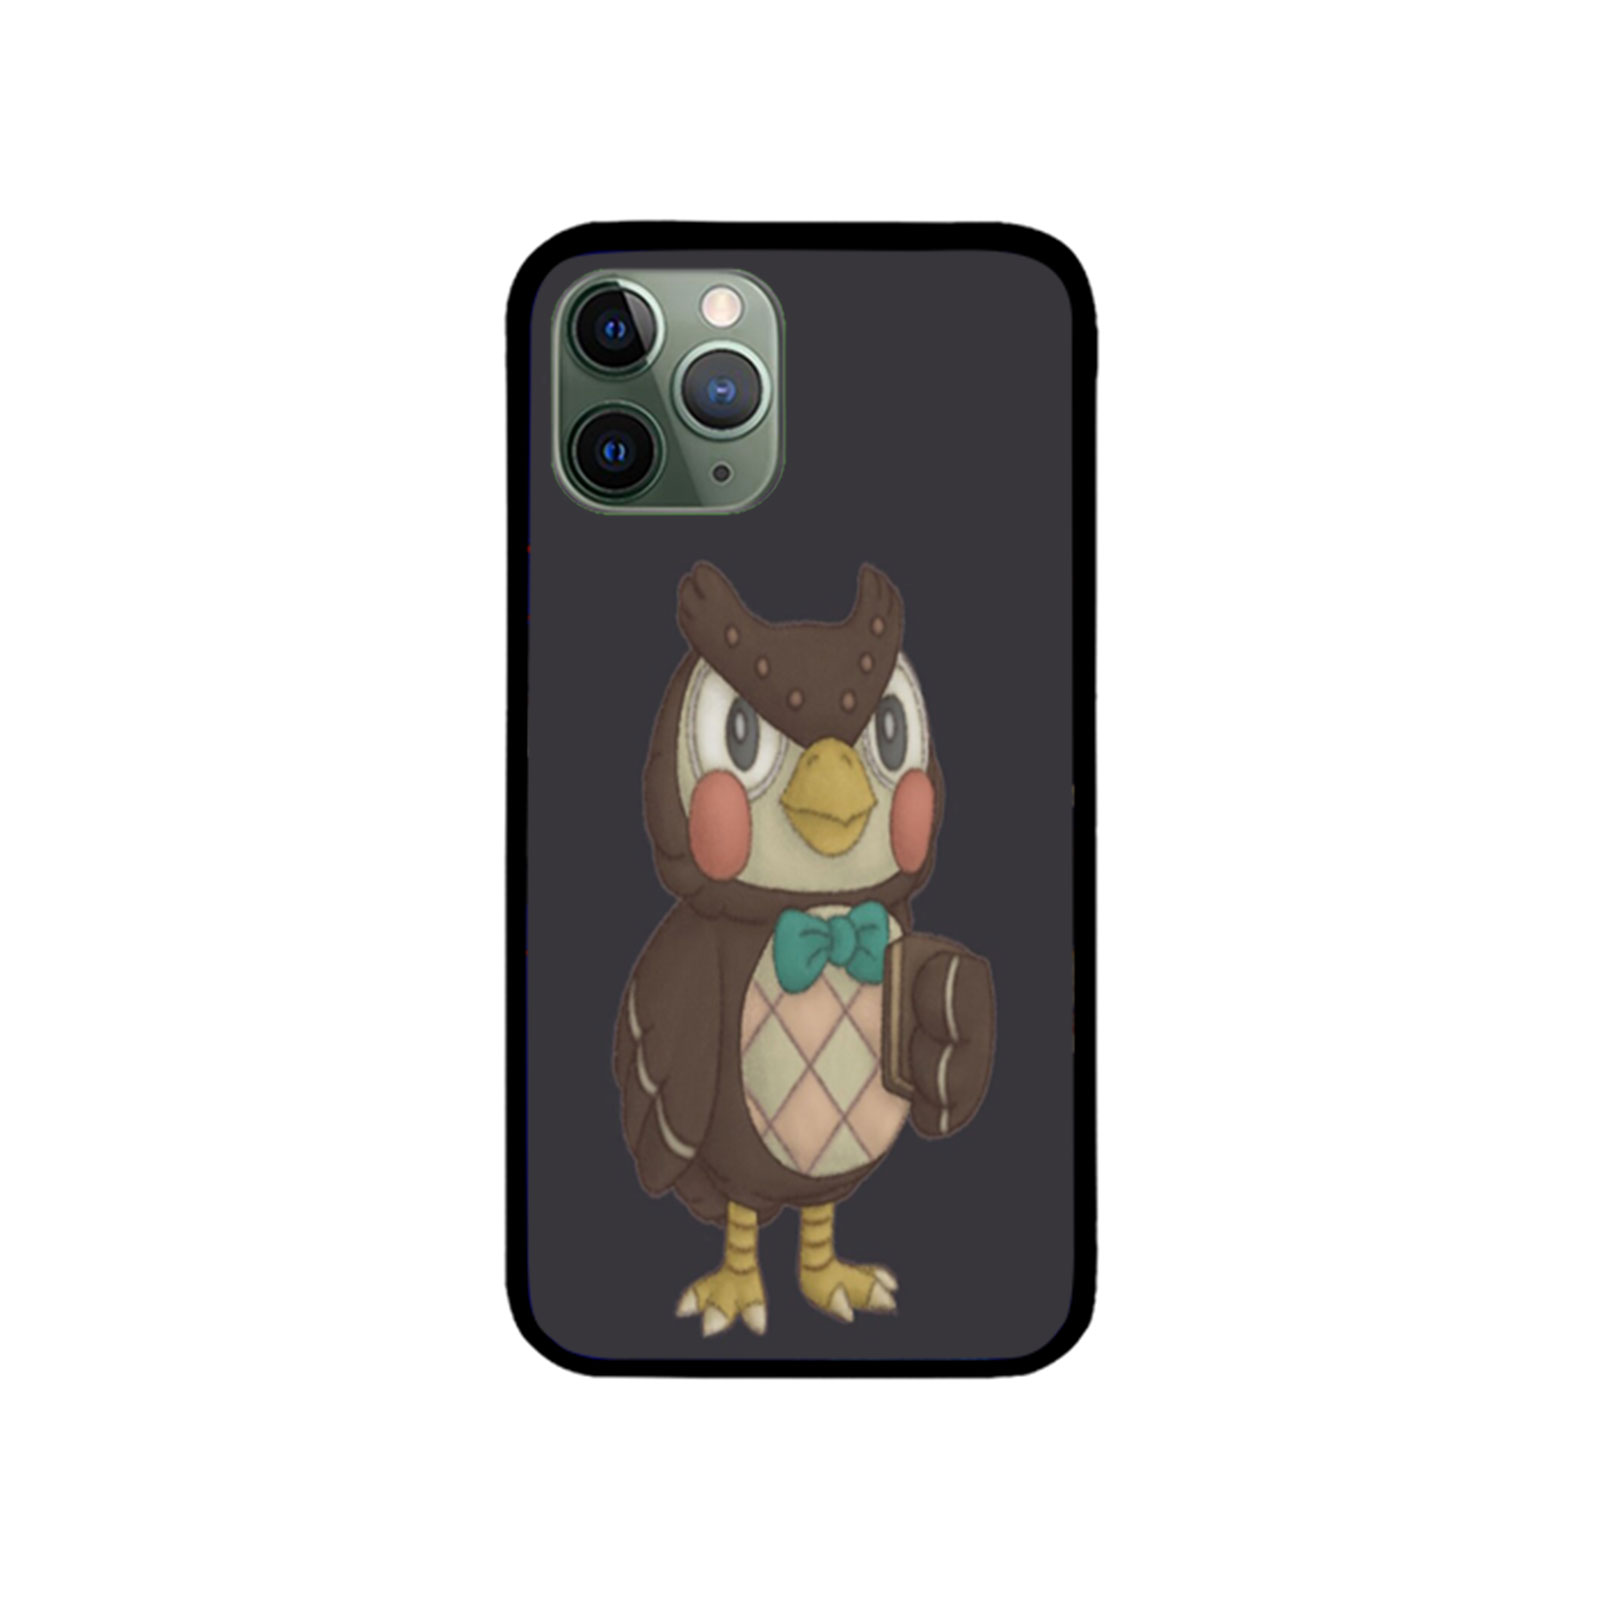 Blathers Animal Crossing iPhone Case 11,X,XS,XR,8,7,6 and More 